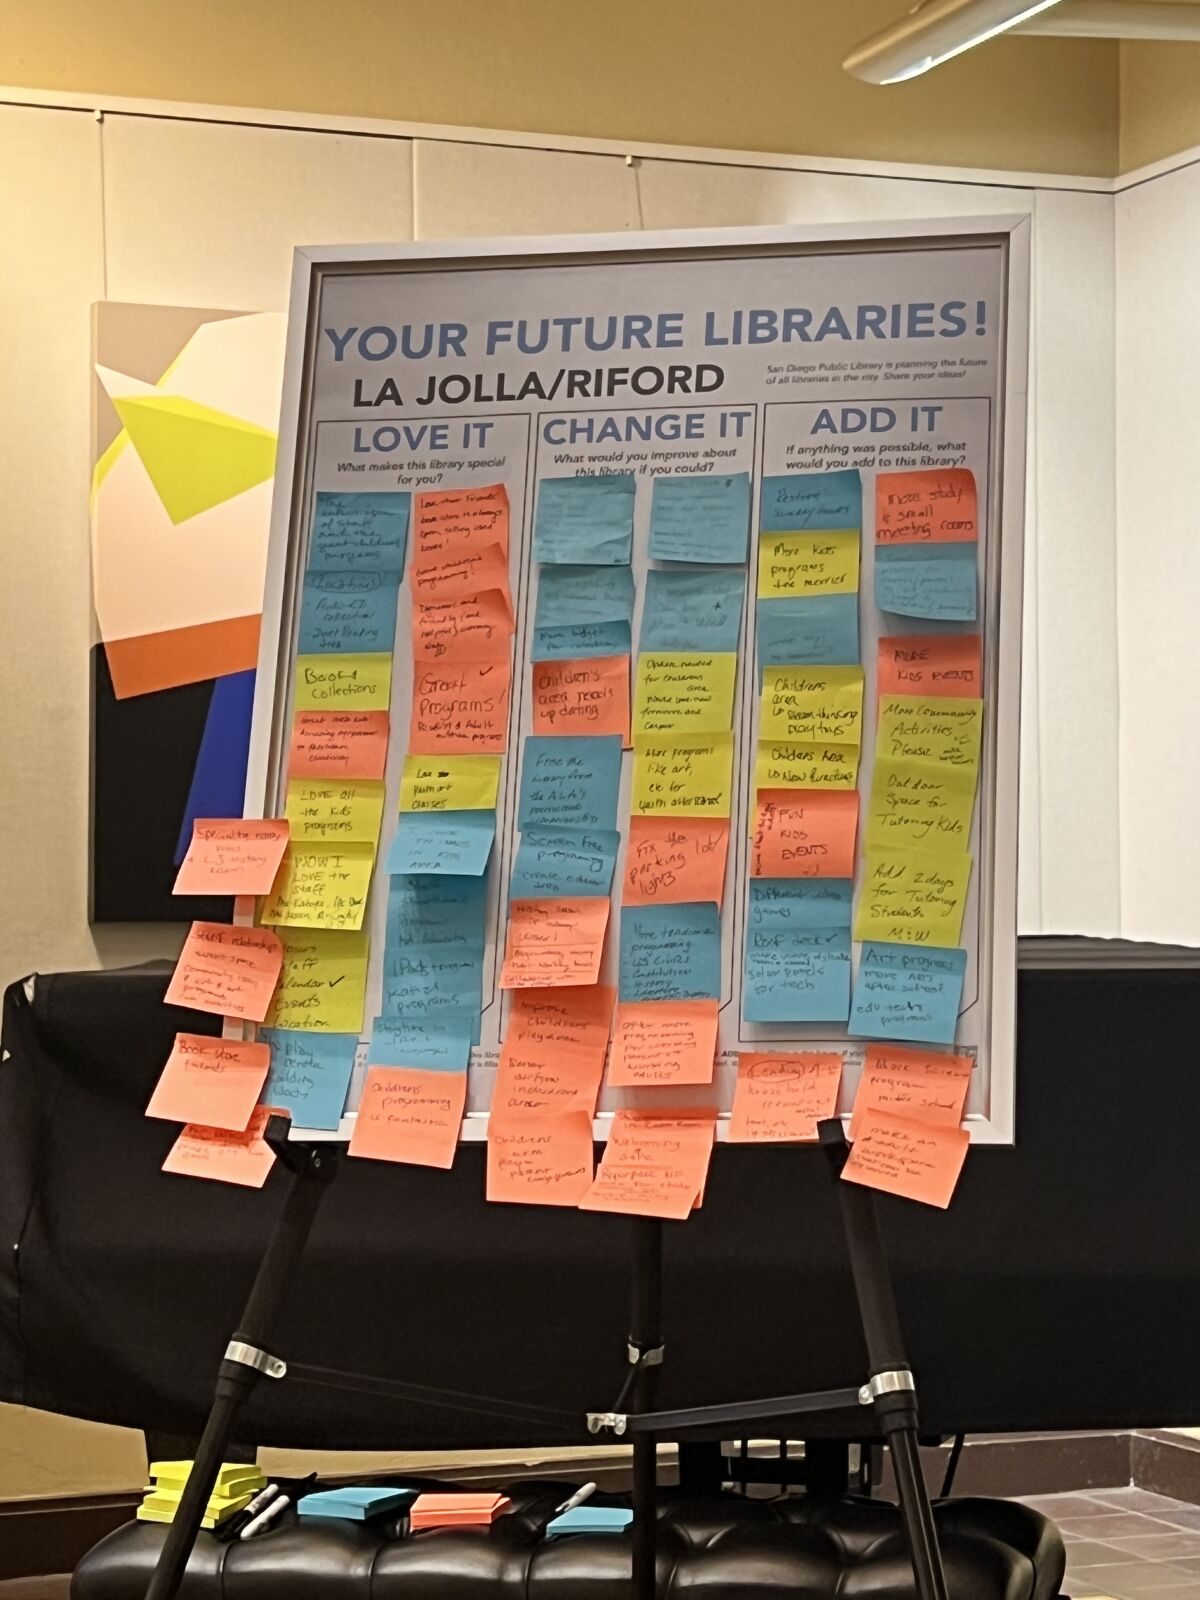 La Jolla/Riford Library users had a lot of suggestions for library staff. A second board was added later.